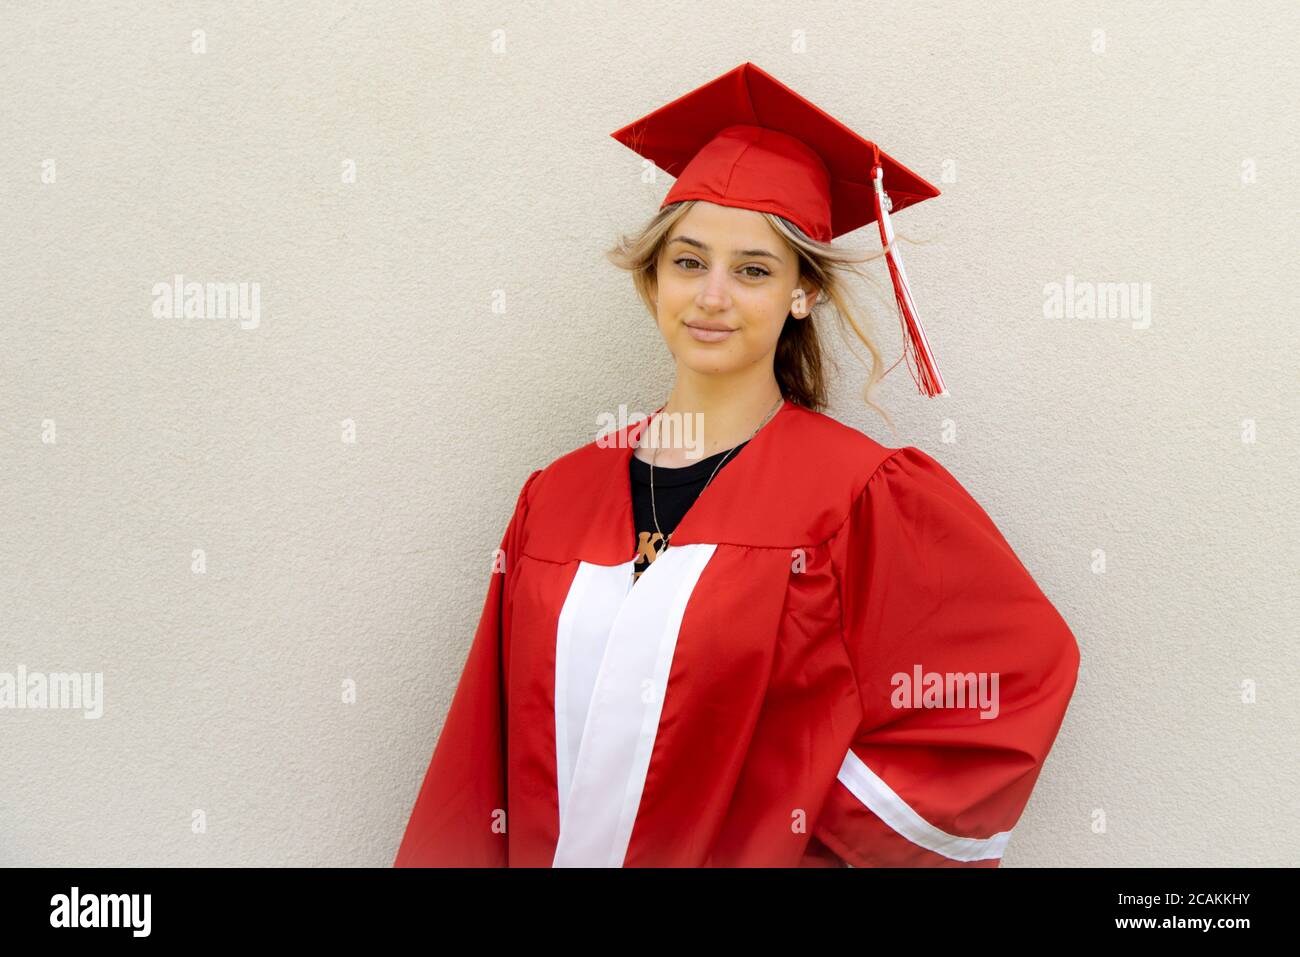 Young caucasian woman student wearing red graduation cap and gown. Stock Photo